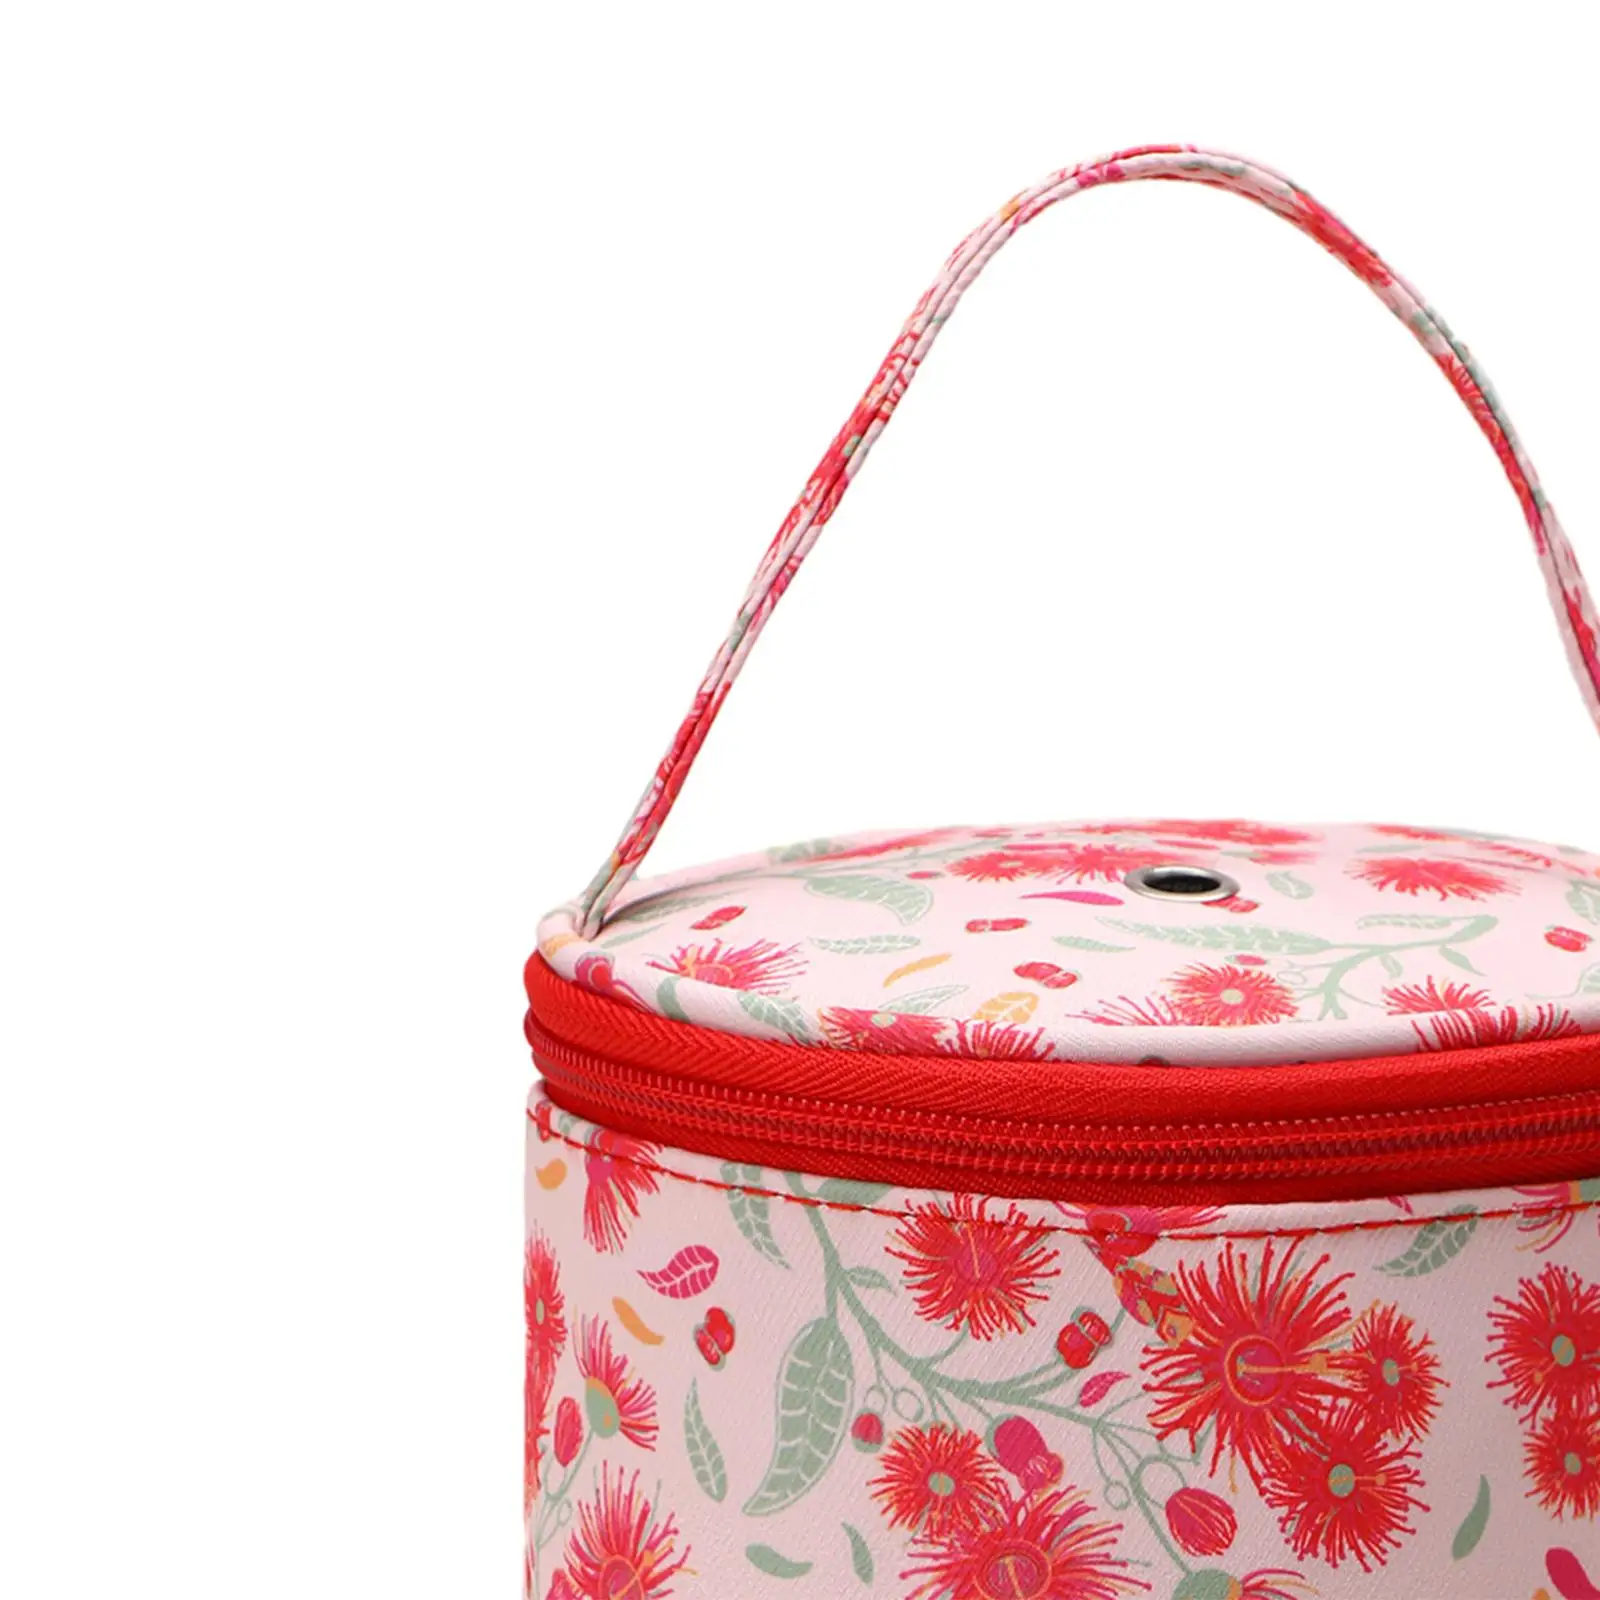 Knitting Bag Tote Container Case Zipper Closure Crocheting Knitting Supplies